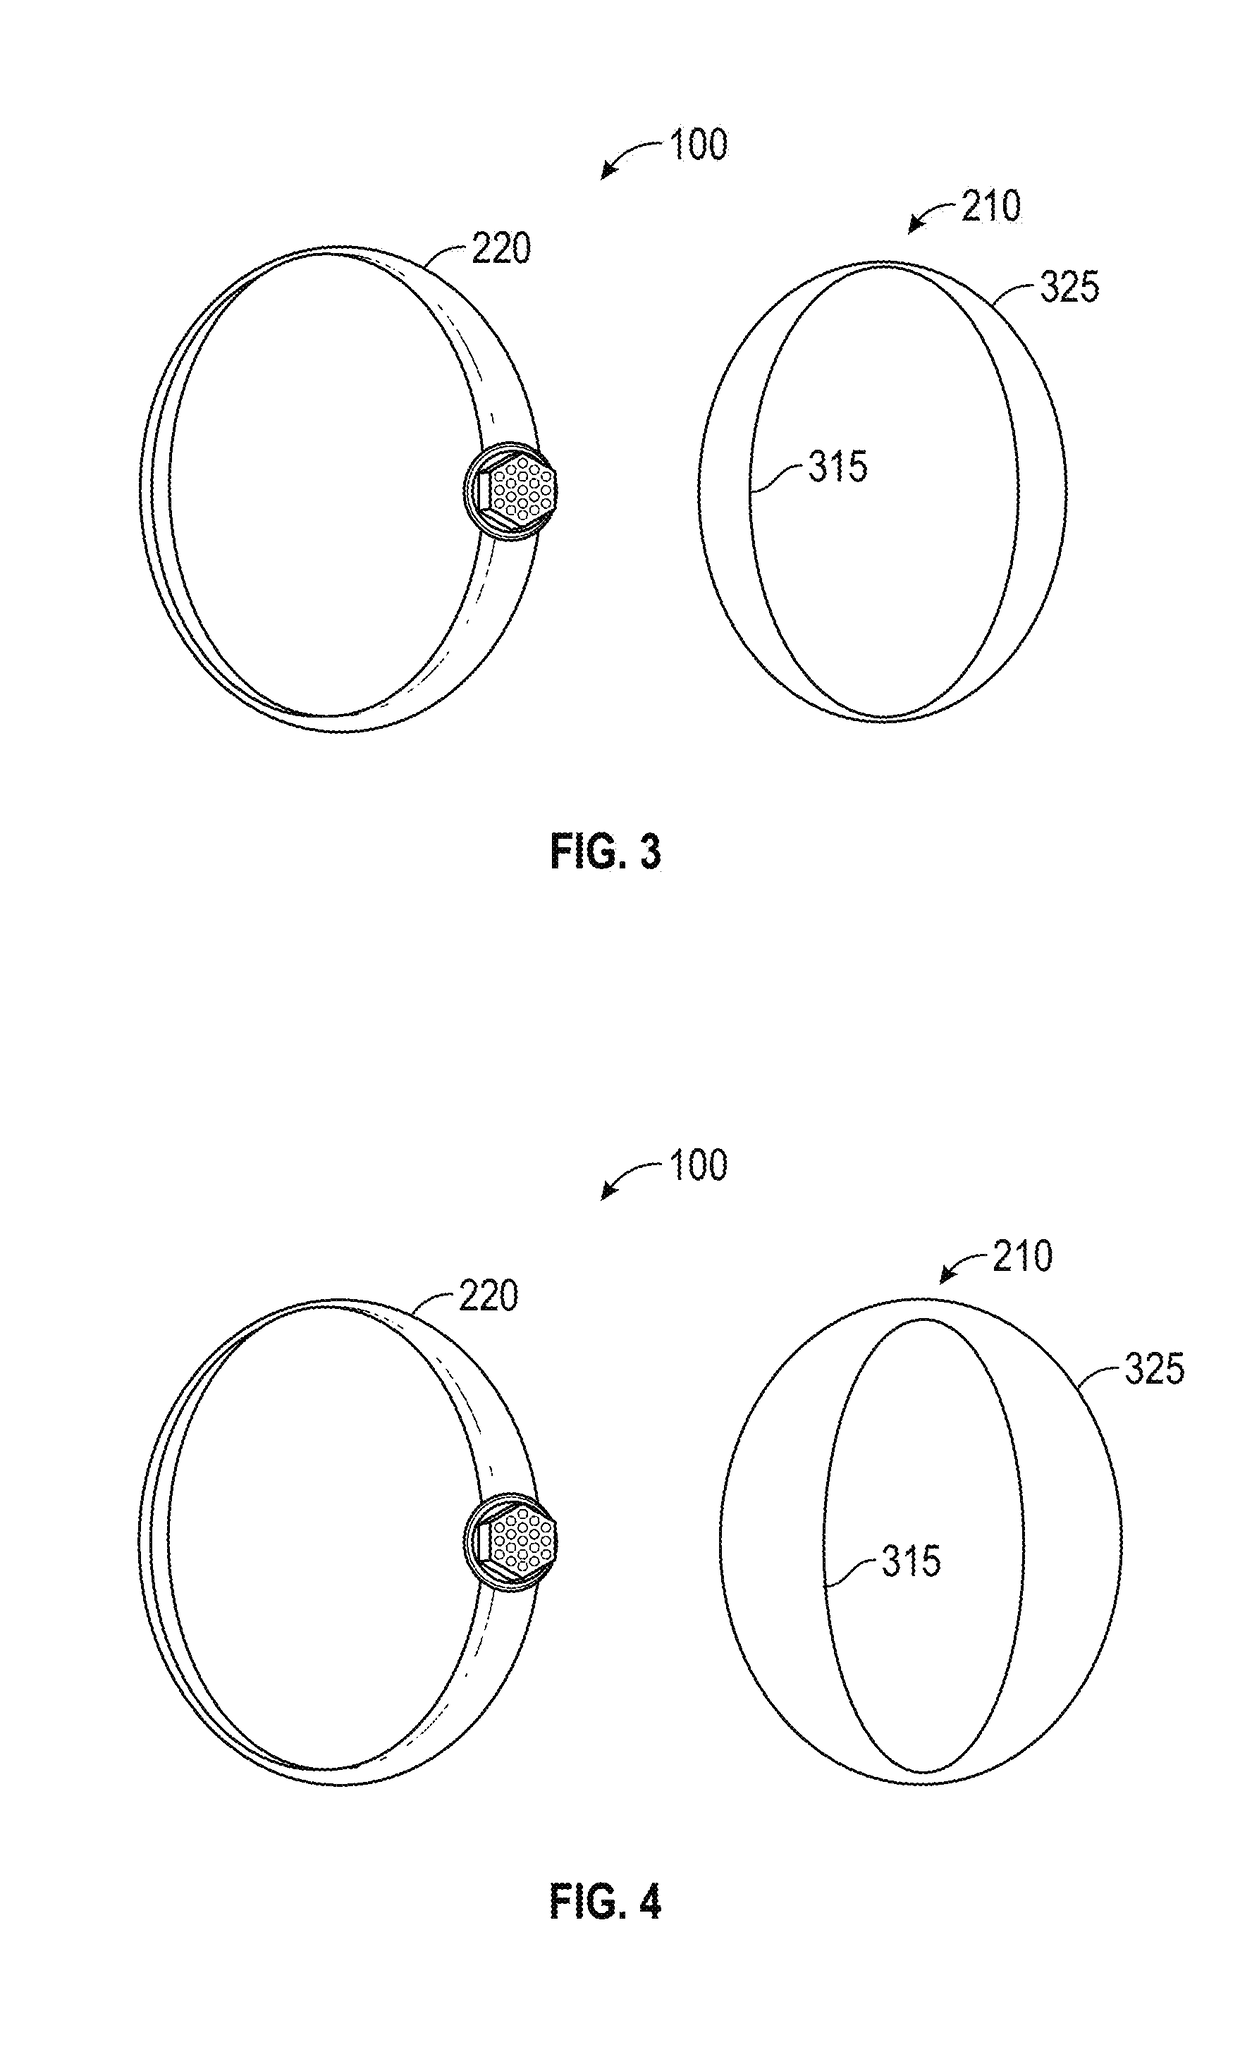 Finger ring electrocardiogram monitor trigger systems and associated methods